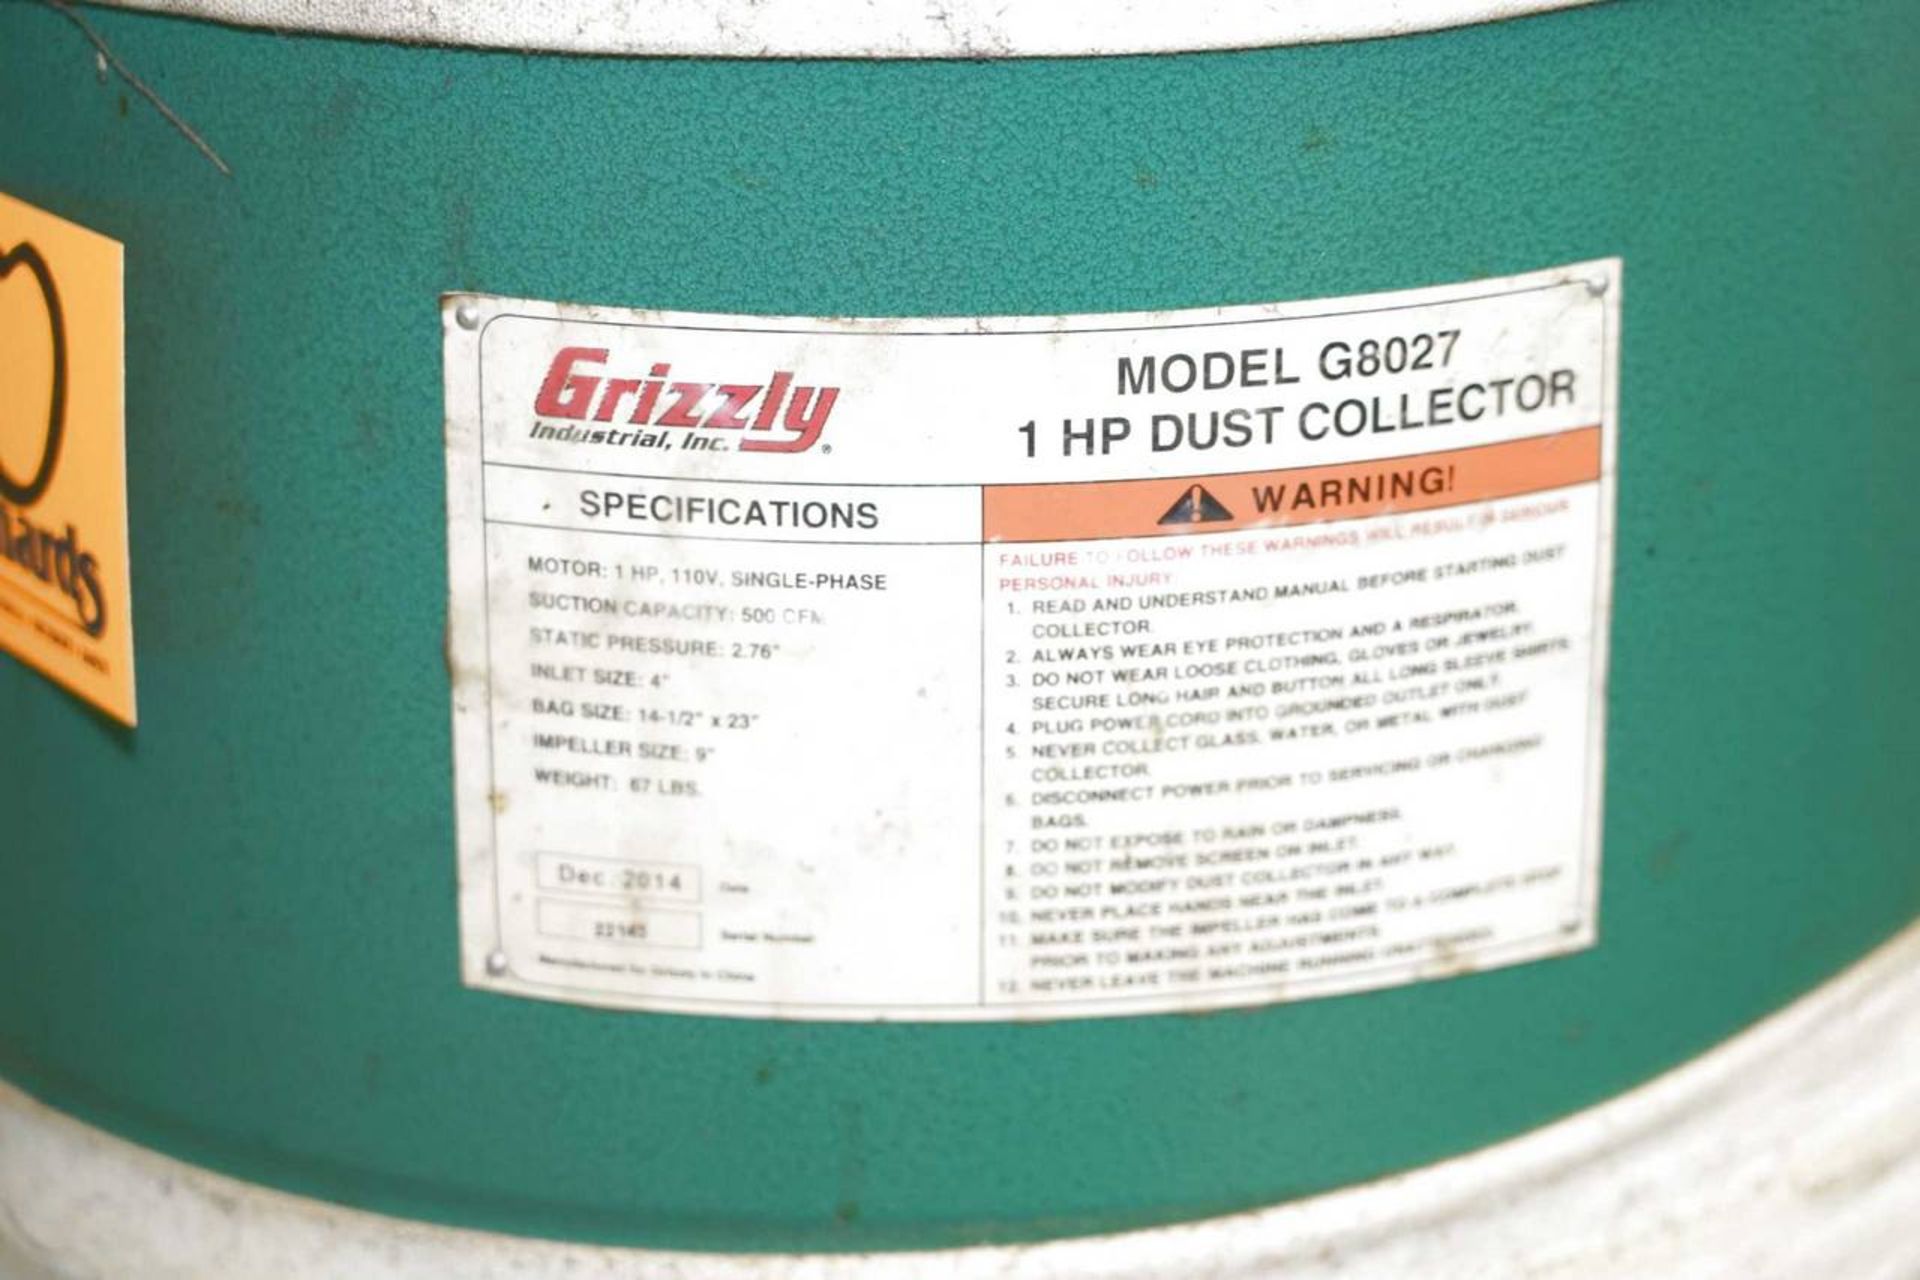 2014 Grizzly Industrial G8027 Dust Collector - Image 2 of 2